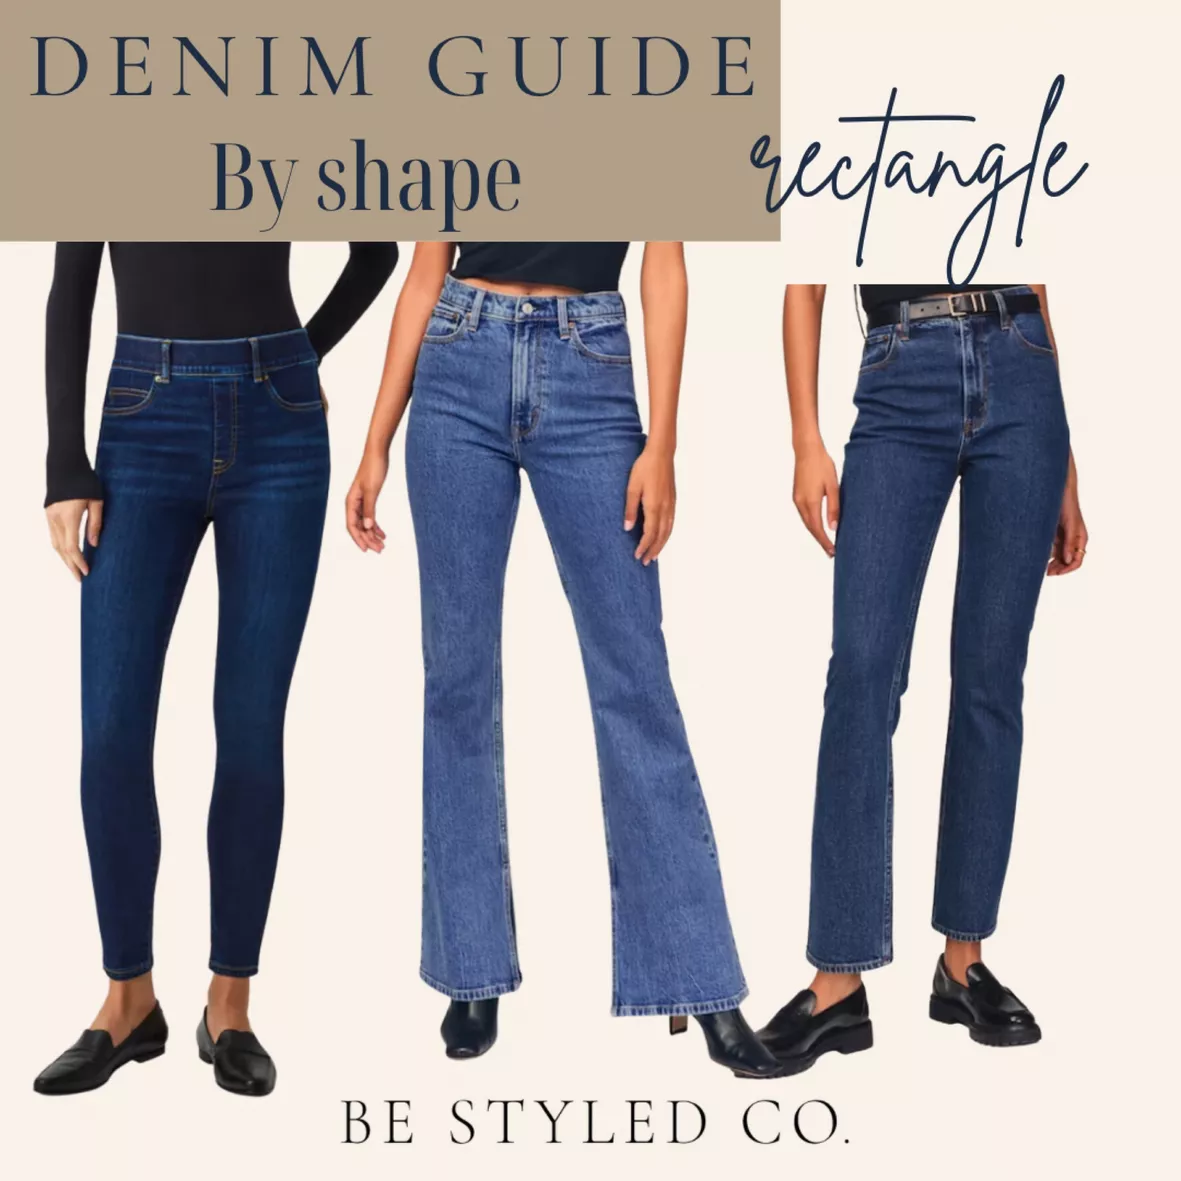 BeStyledCo's Denim Guide Collection on LTK